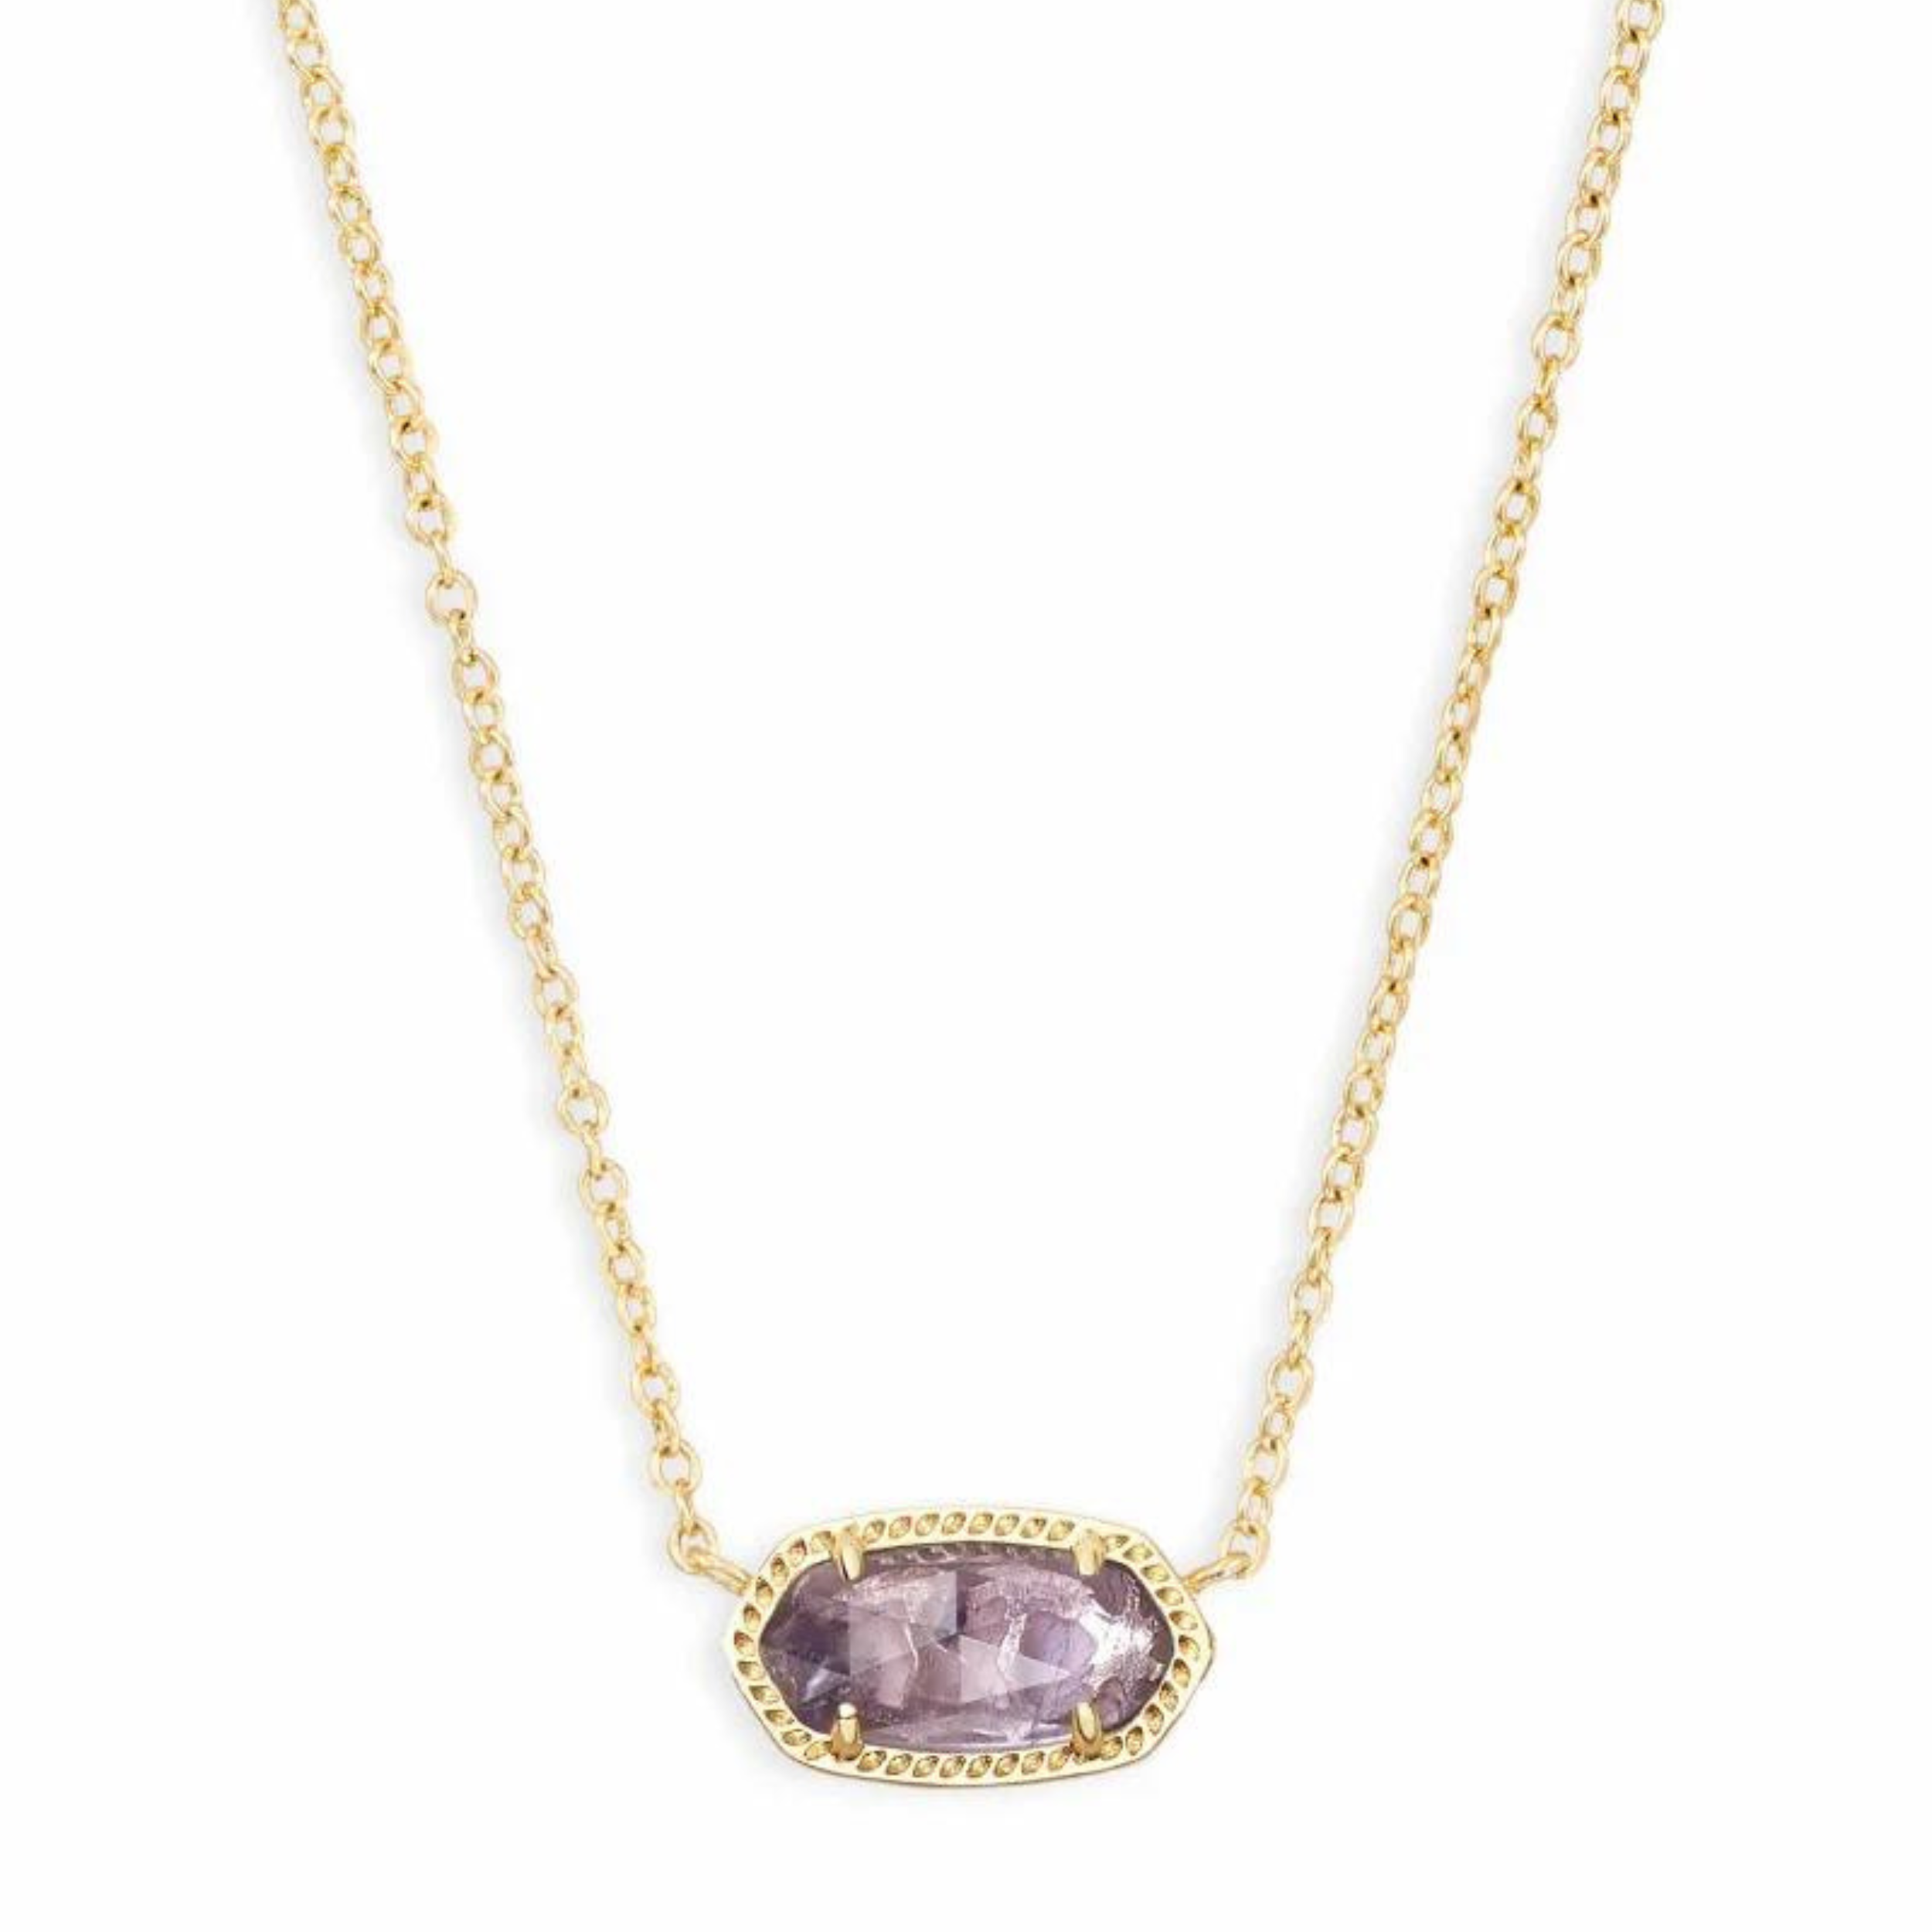 Gold necklace with purple amethyst pendant, pictured on a white background.